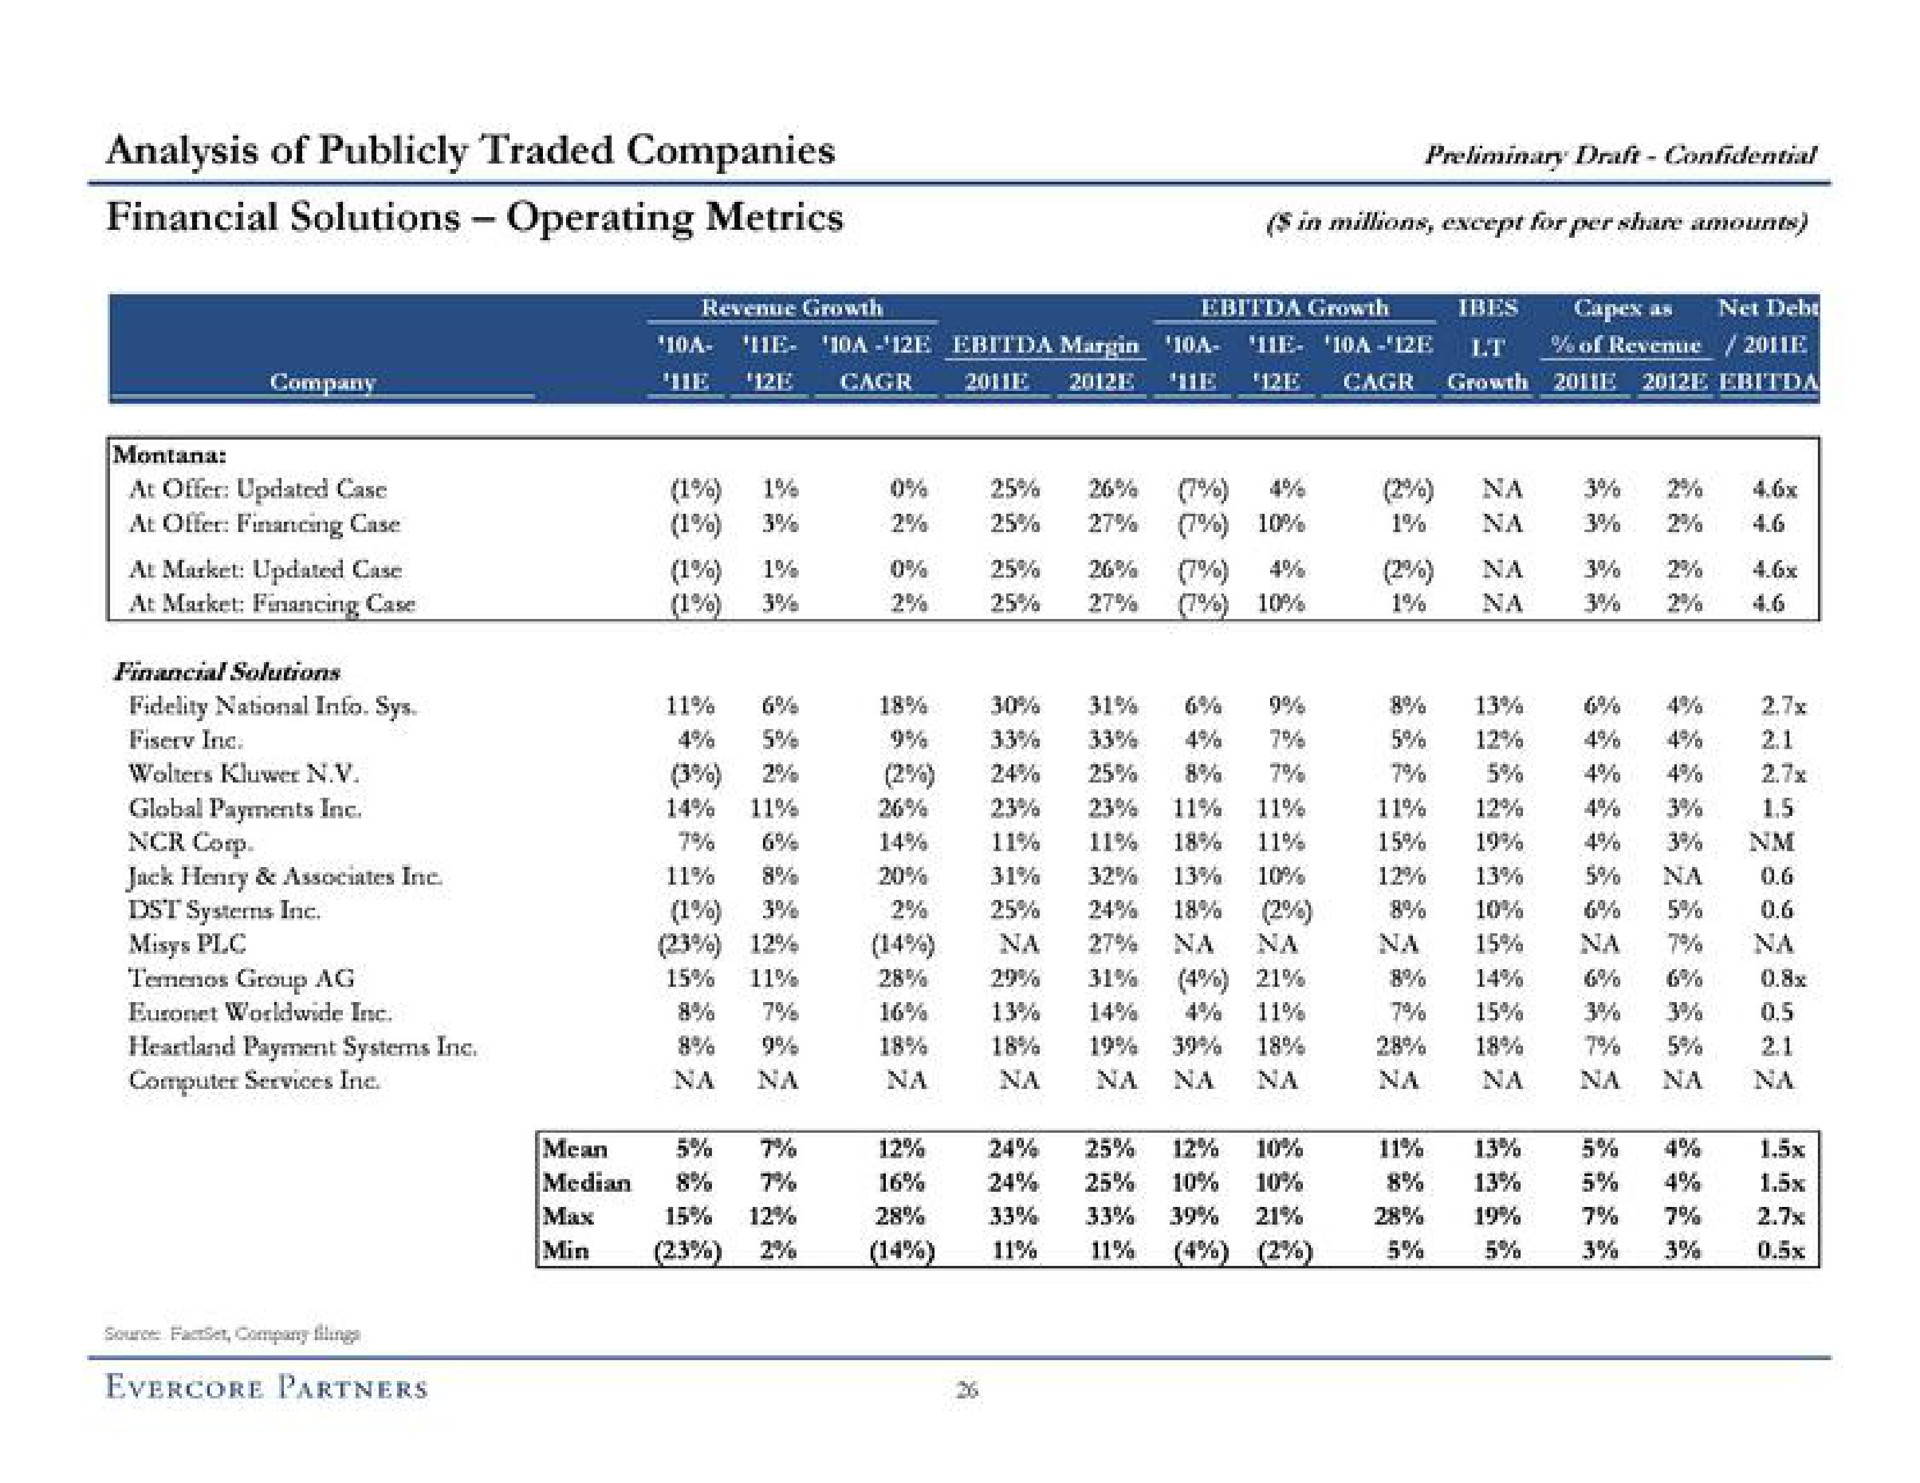 analysis of publicly traded companies financial solutions operating metrics a | Evercore